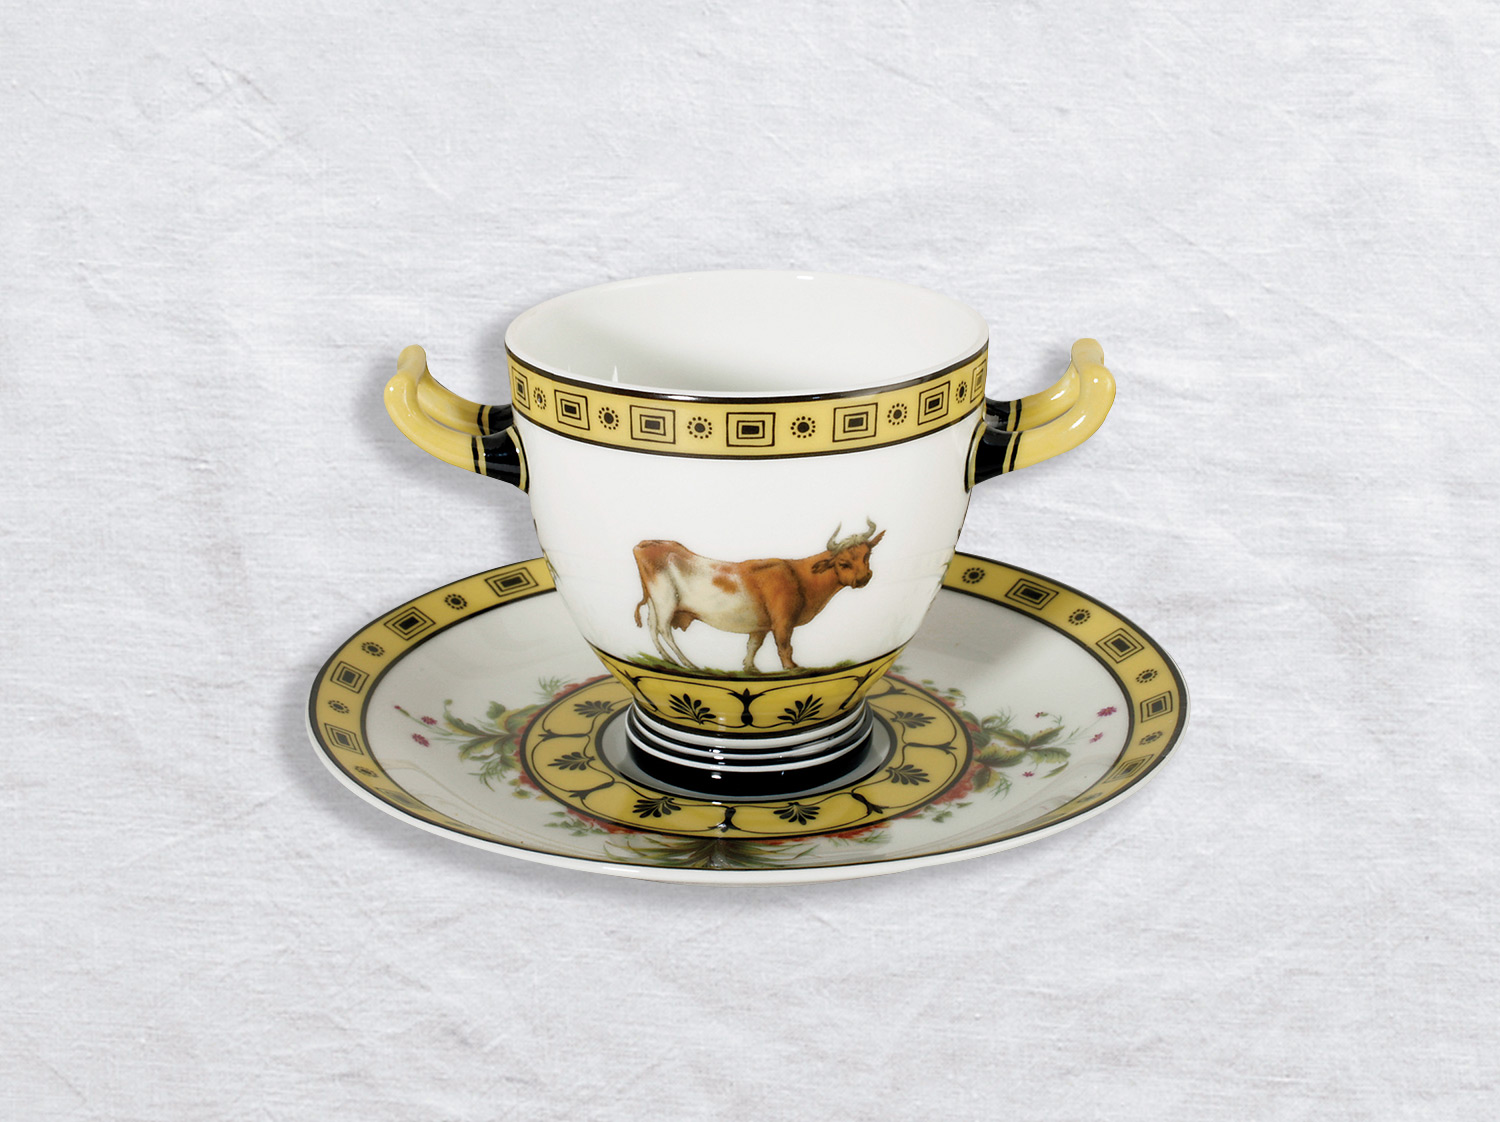 China Etruscan cup with handles and saucer of the collection La laiterie de rambouillet | Bernardaud